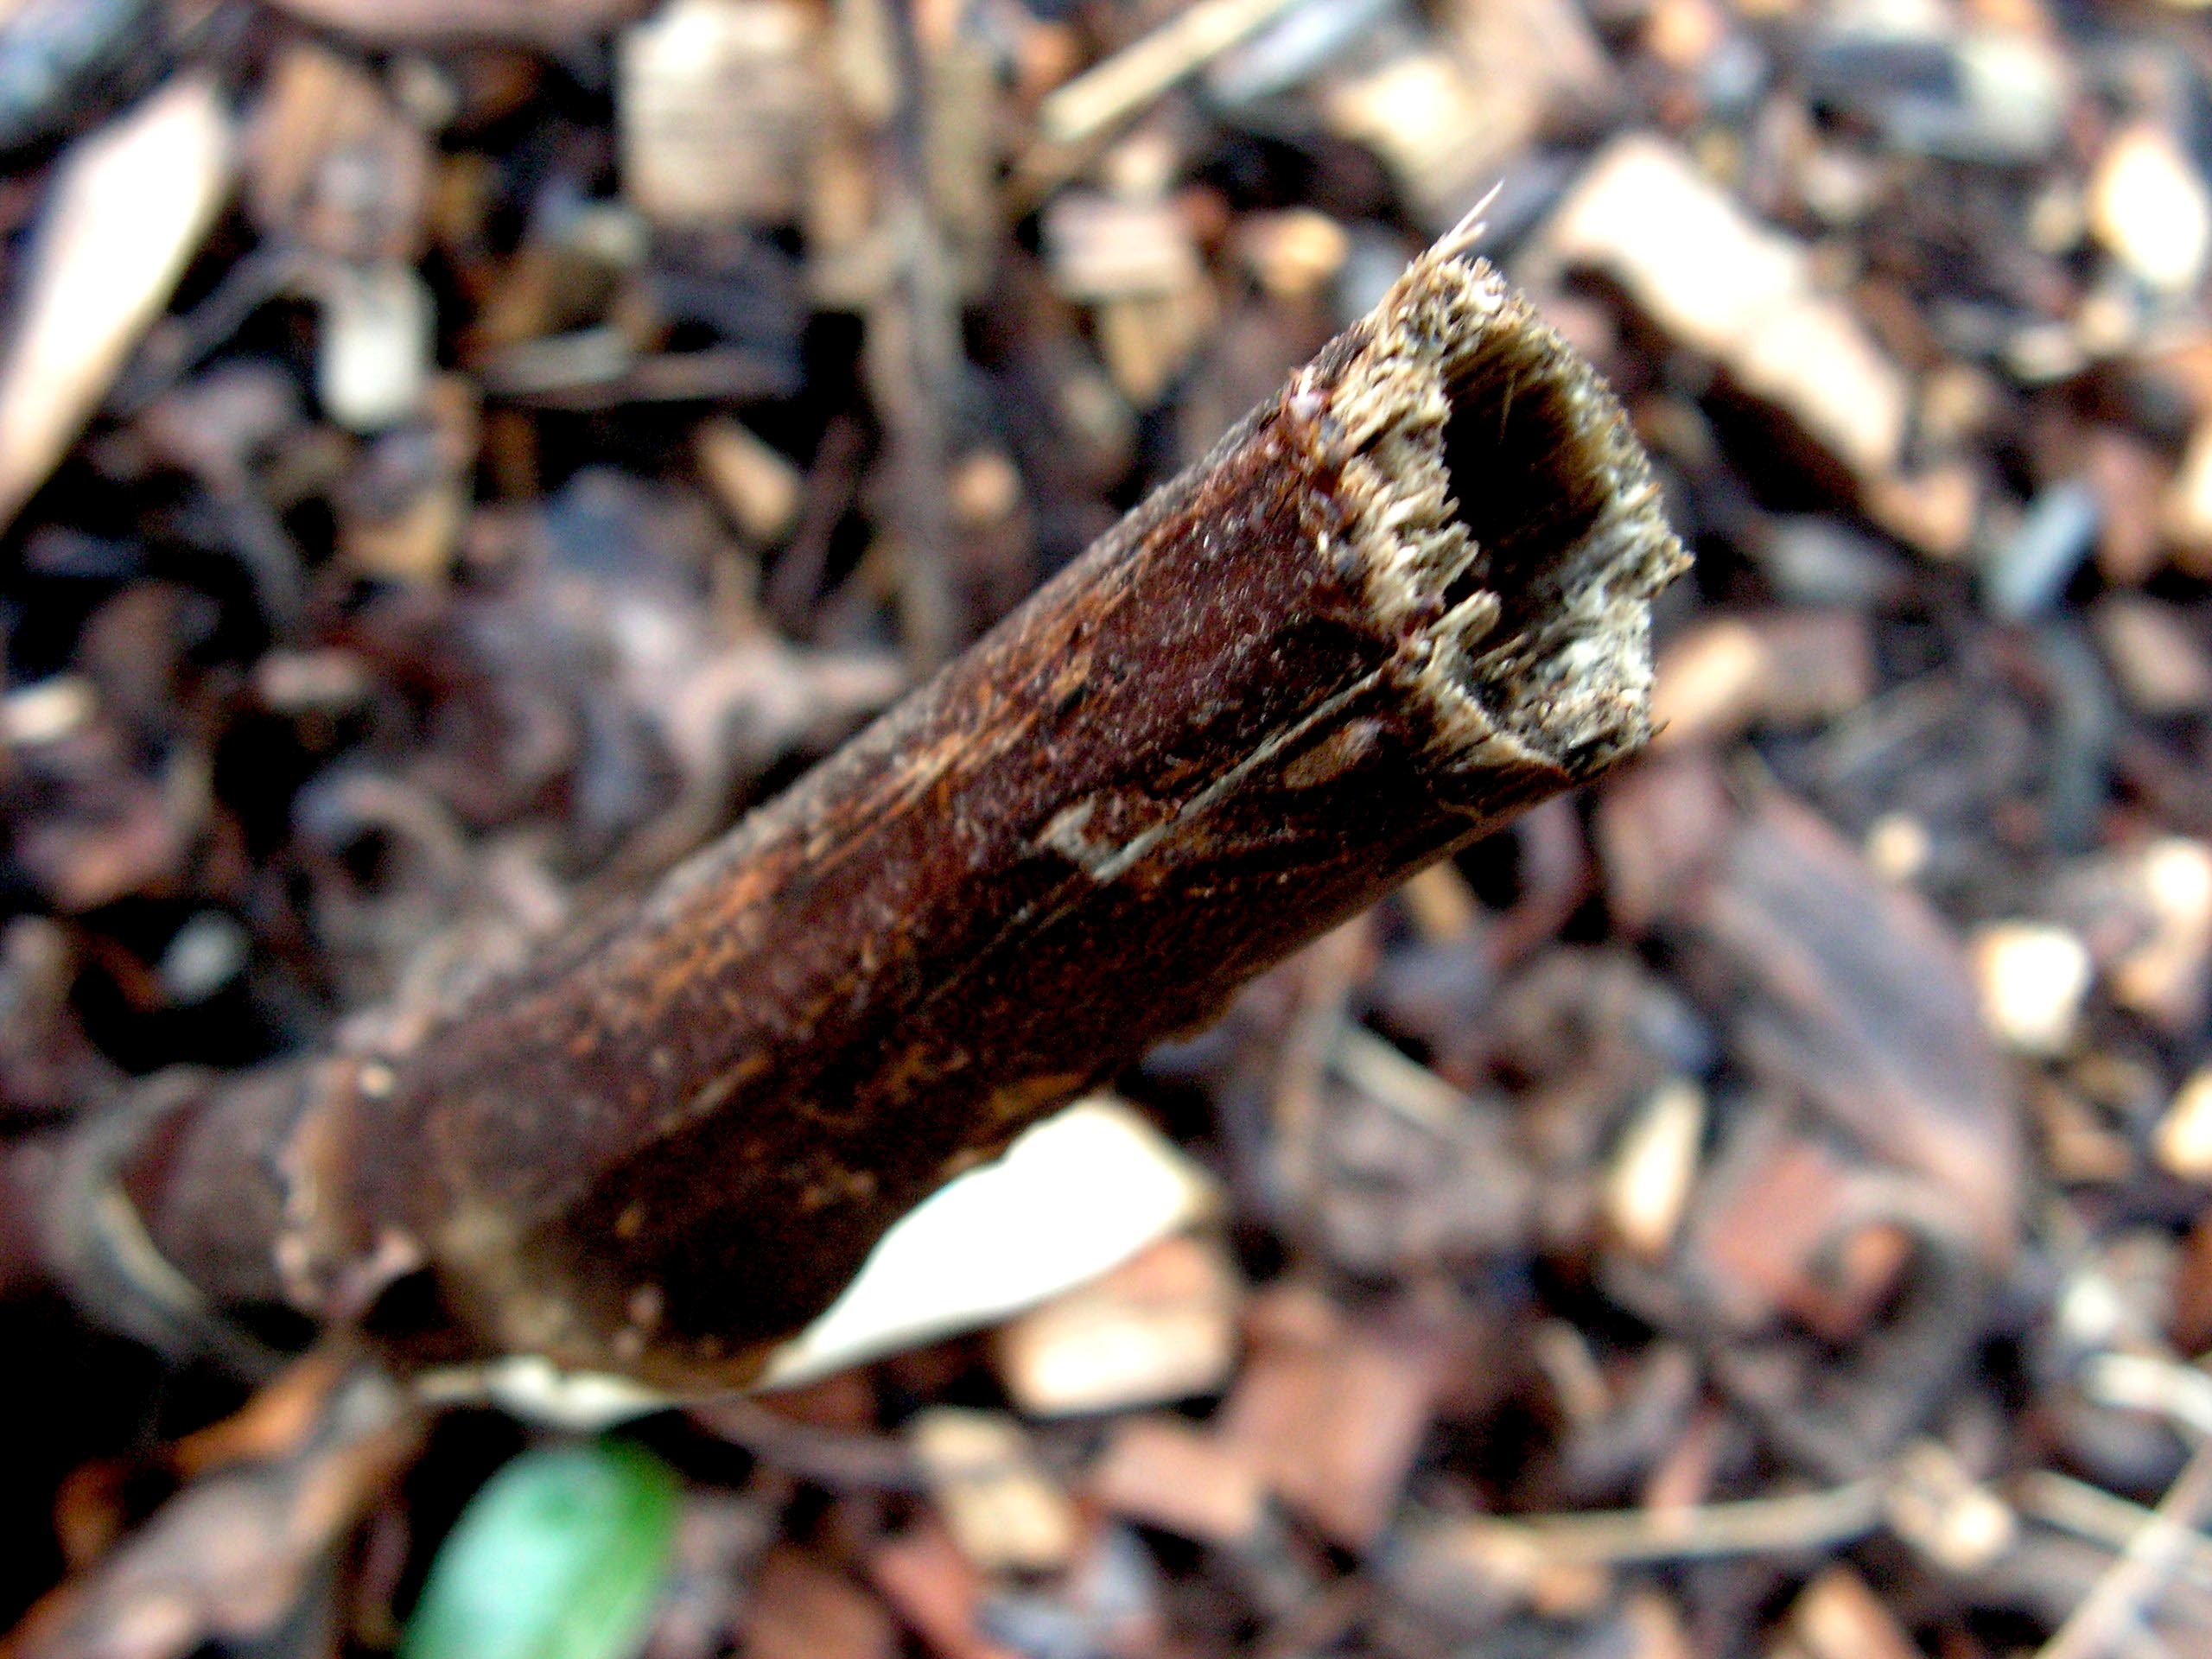 Japanese knotweed cane showing hollow inside